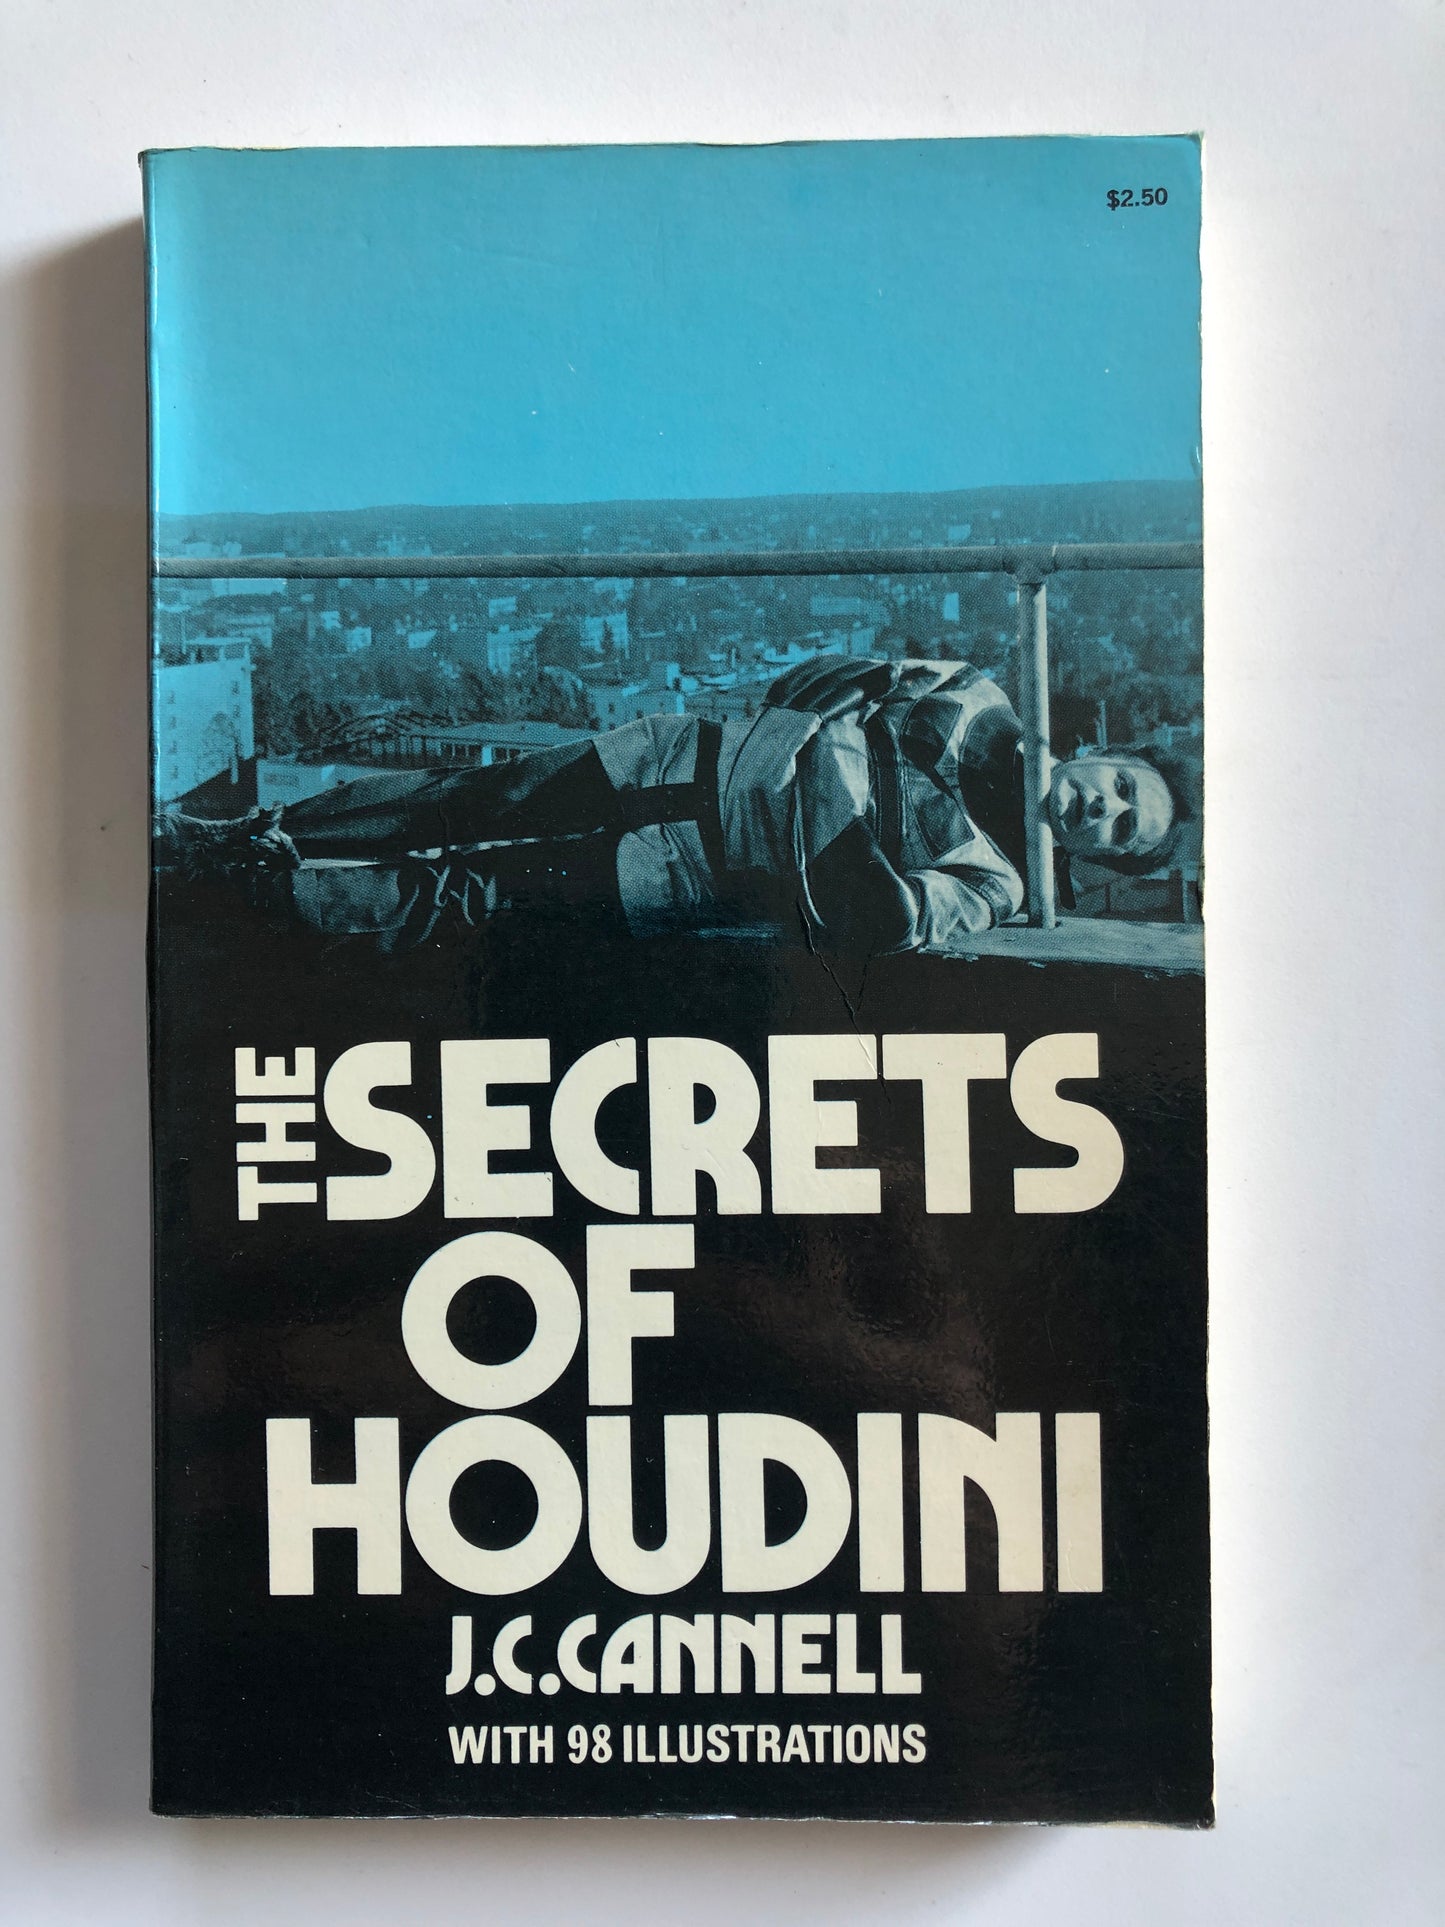 The Secrets of Houdini - J.C. Cannell